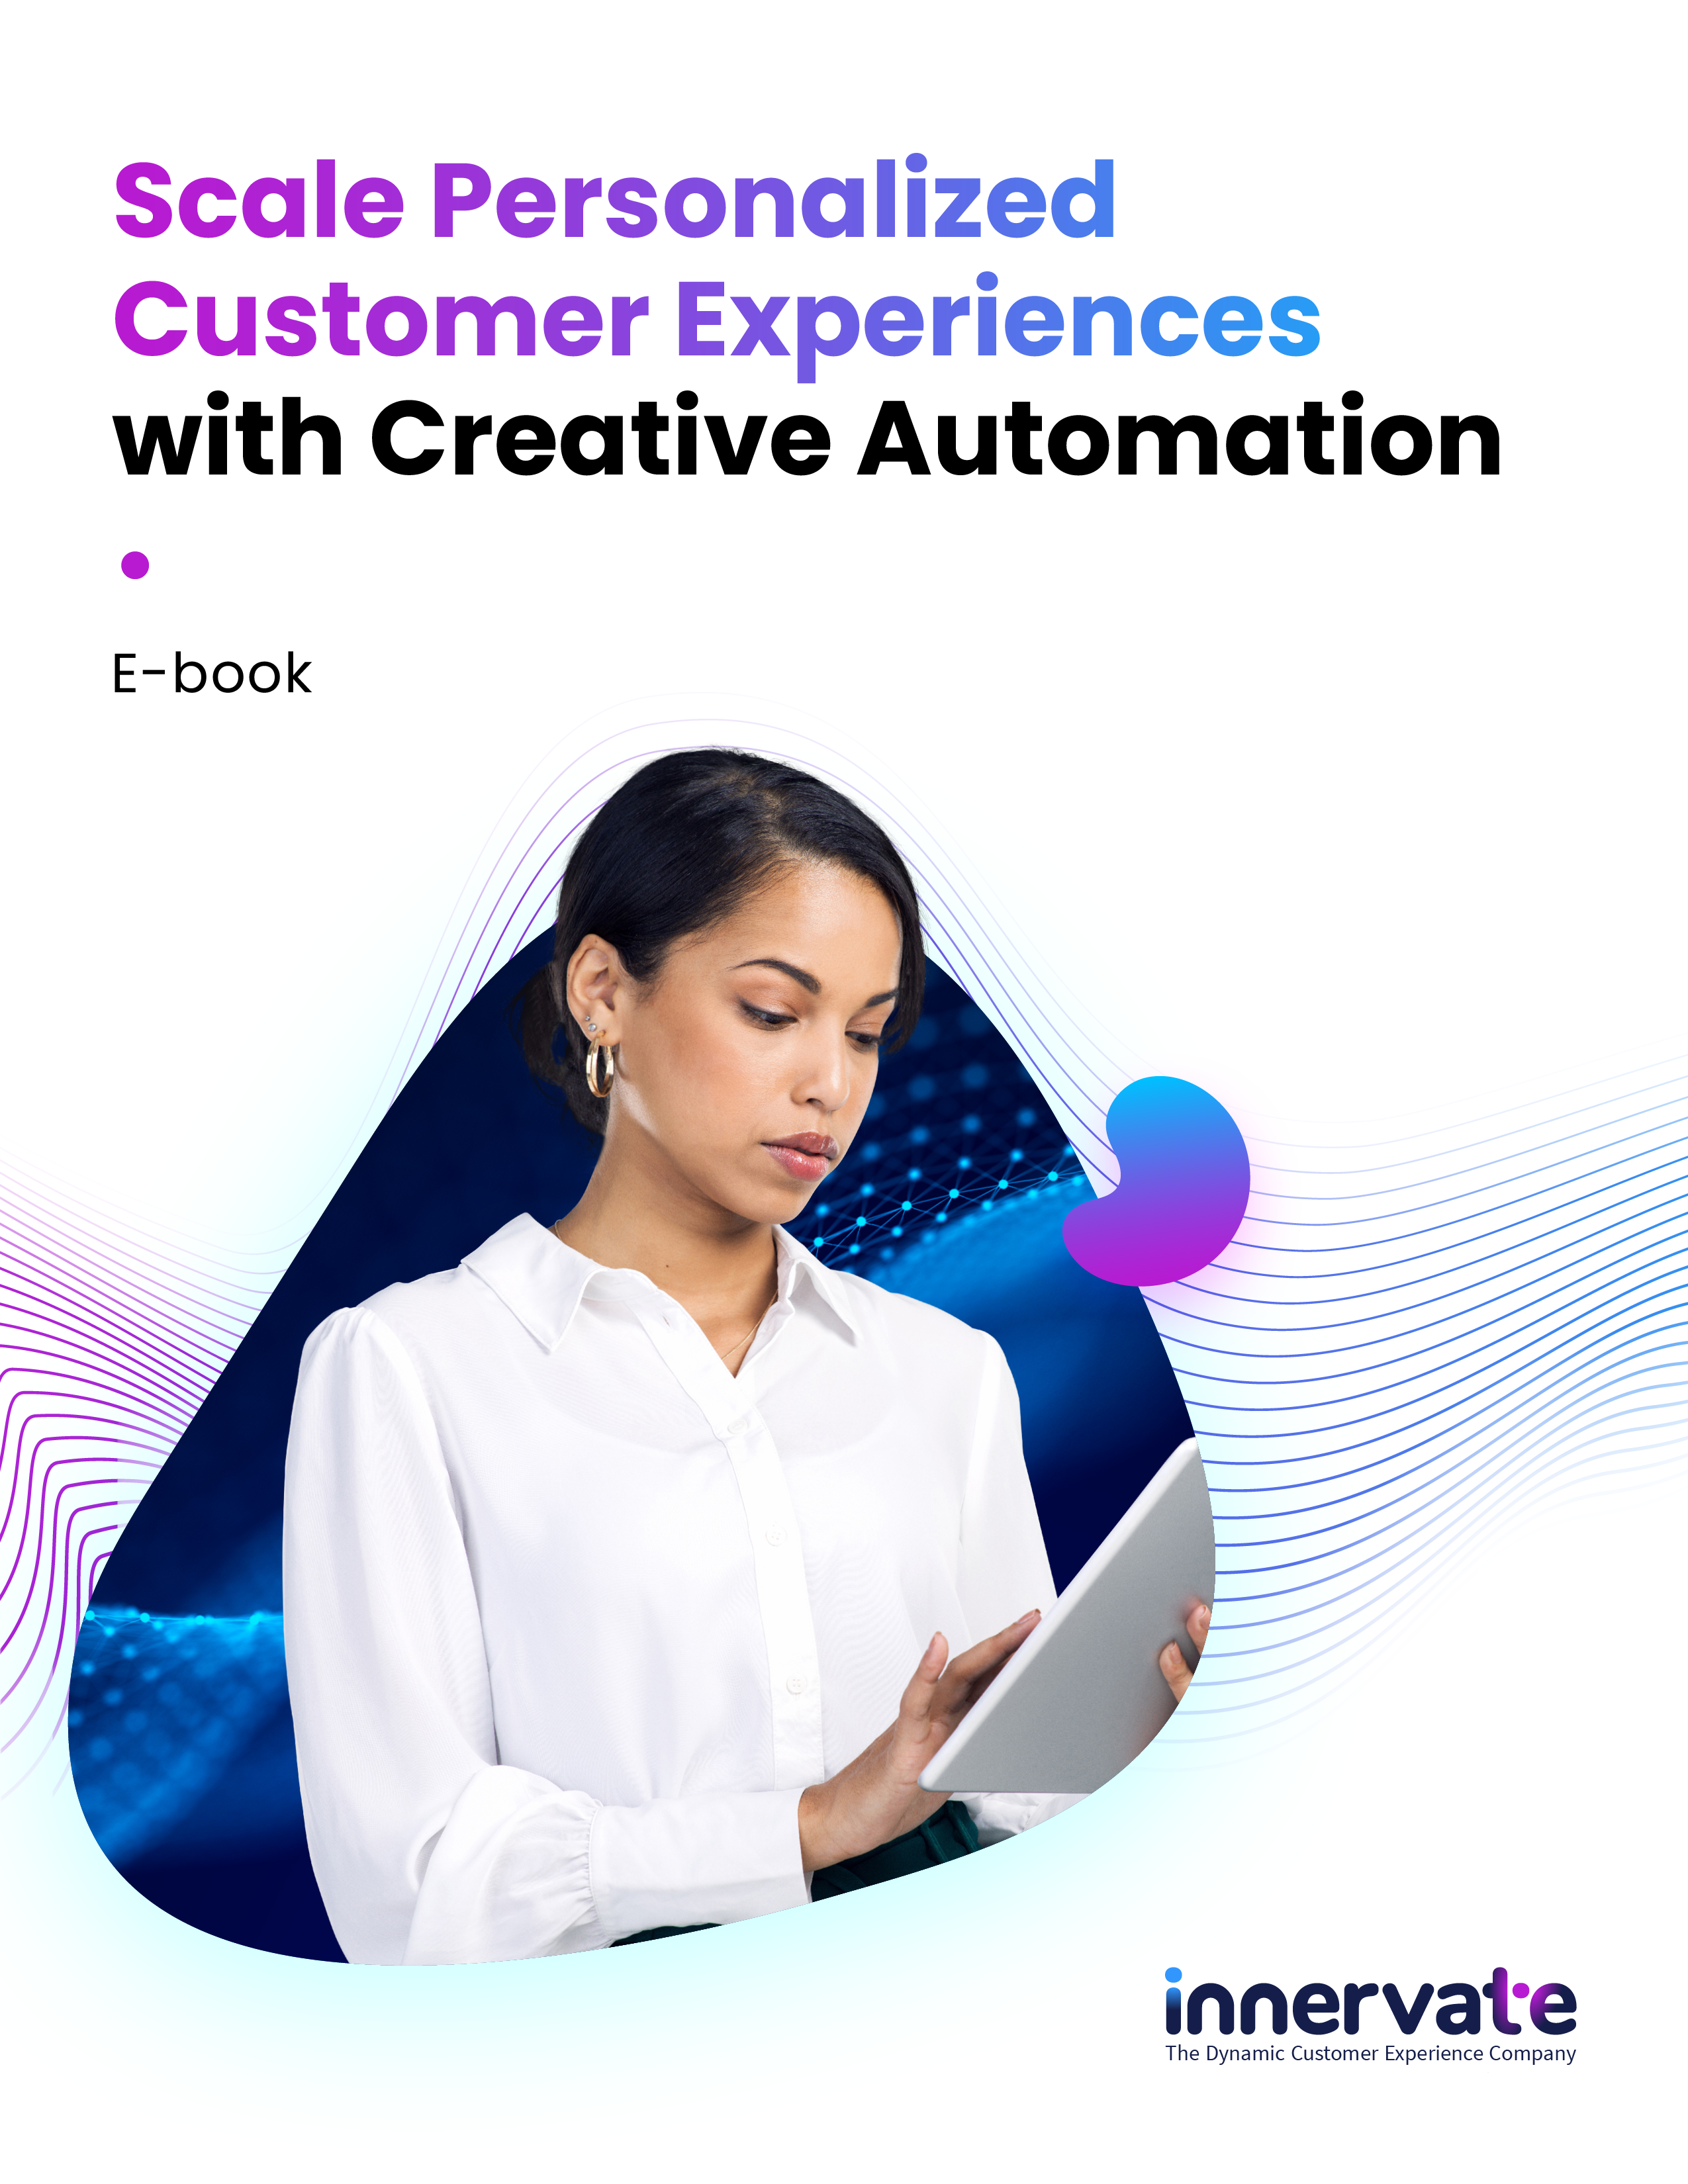 2023-01-EB-Innervate-How to Scale Personalized Customer Experiences with Creative Automation